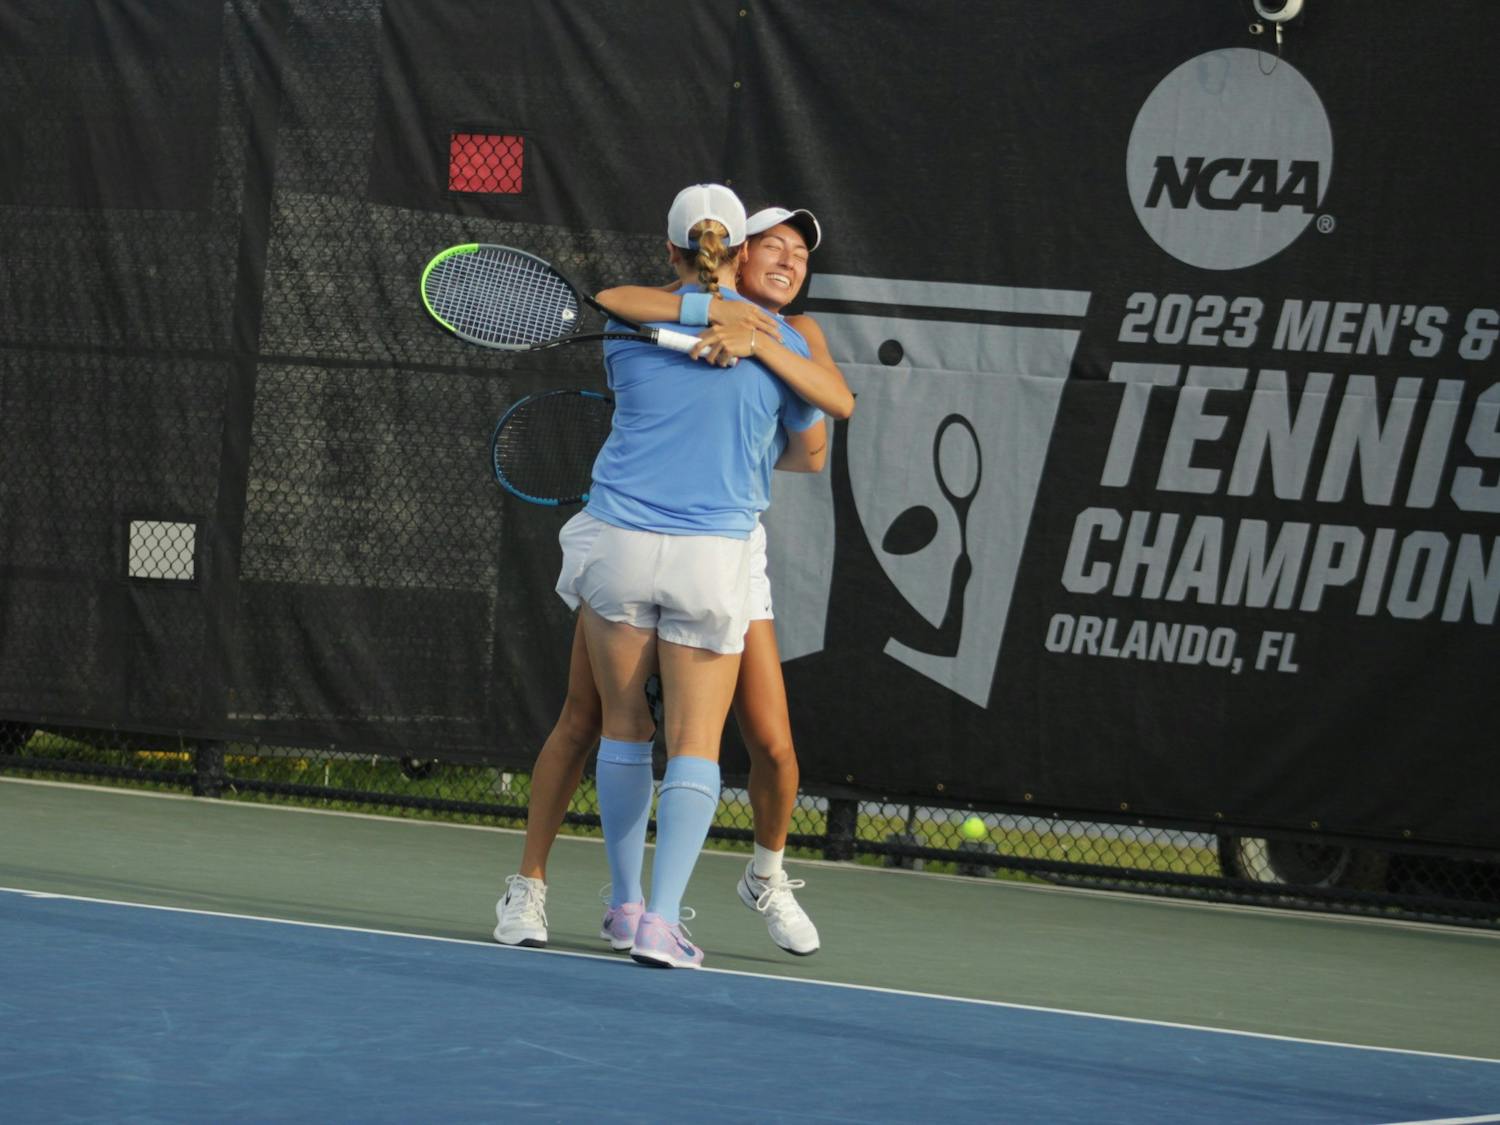 First-year Reese Brantmeier and junior Reilly Tran celebrate after securing the doubles point against N.C. State on Saturday, May 20, 2023. The Tar Heels won, 4-1.